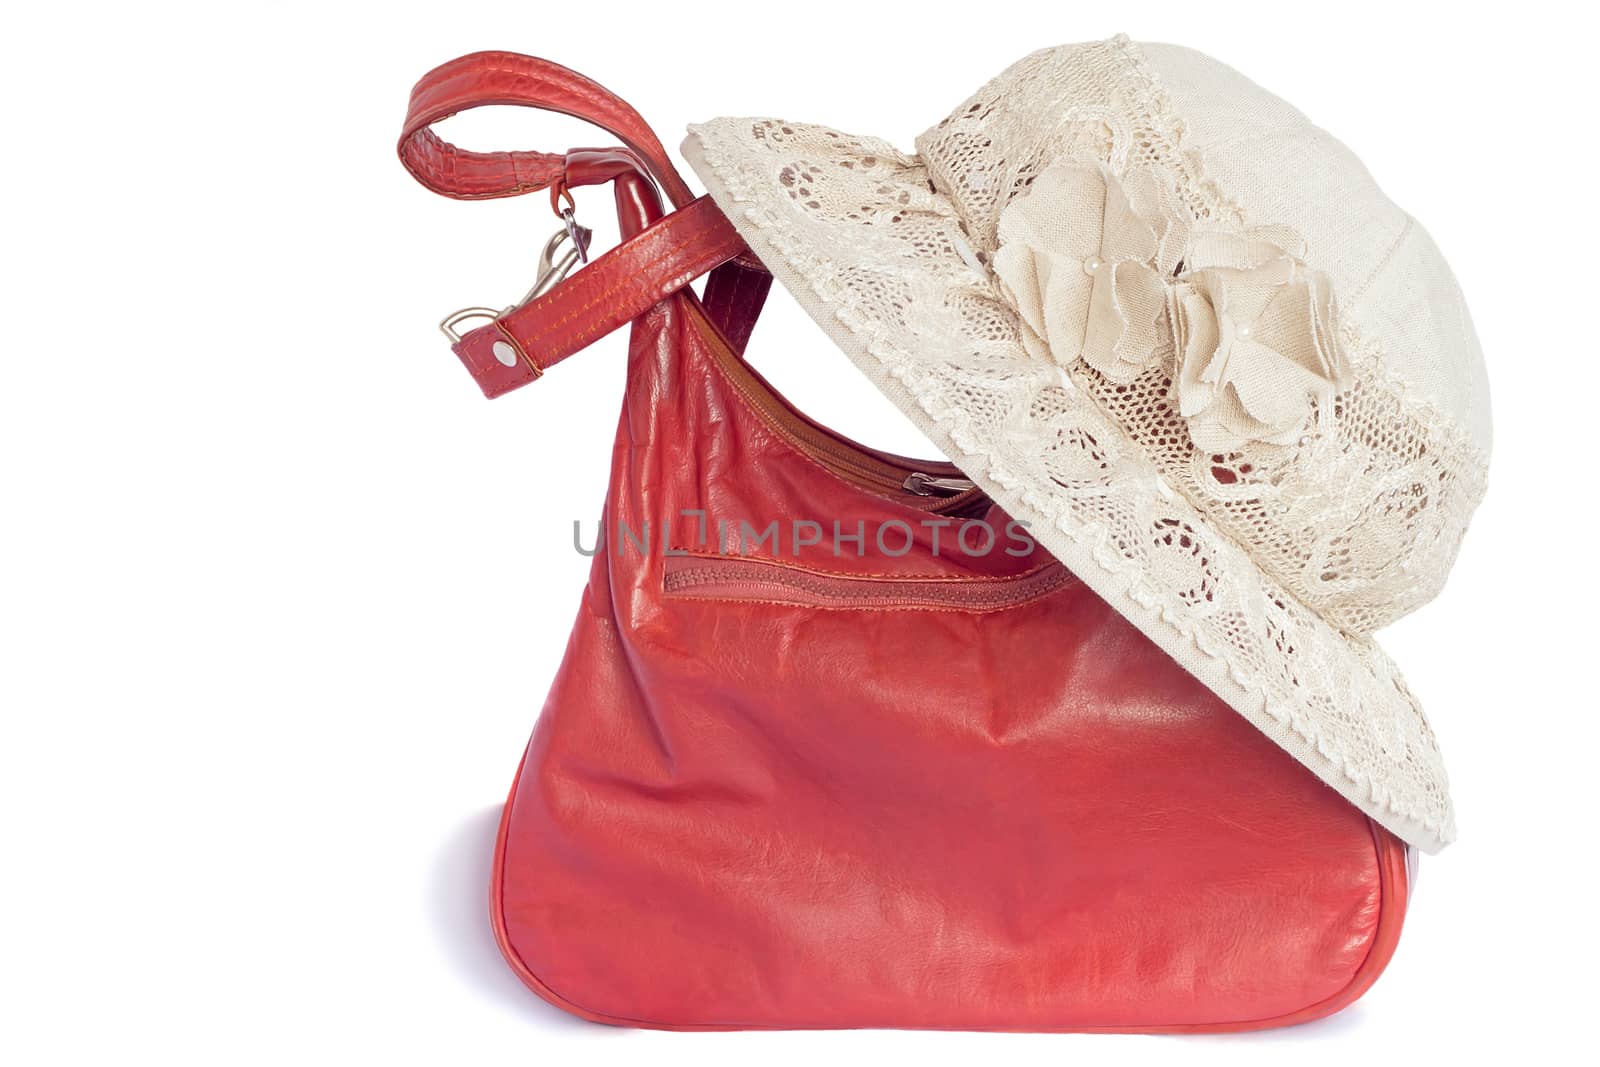 Female hat from a linen cloth and lacy fabric for protection against the sun and a leather bag. Are presented on a white background.